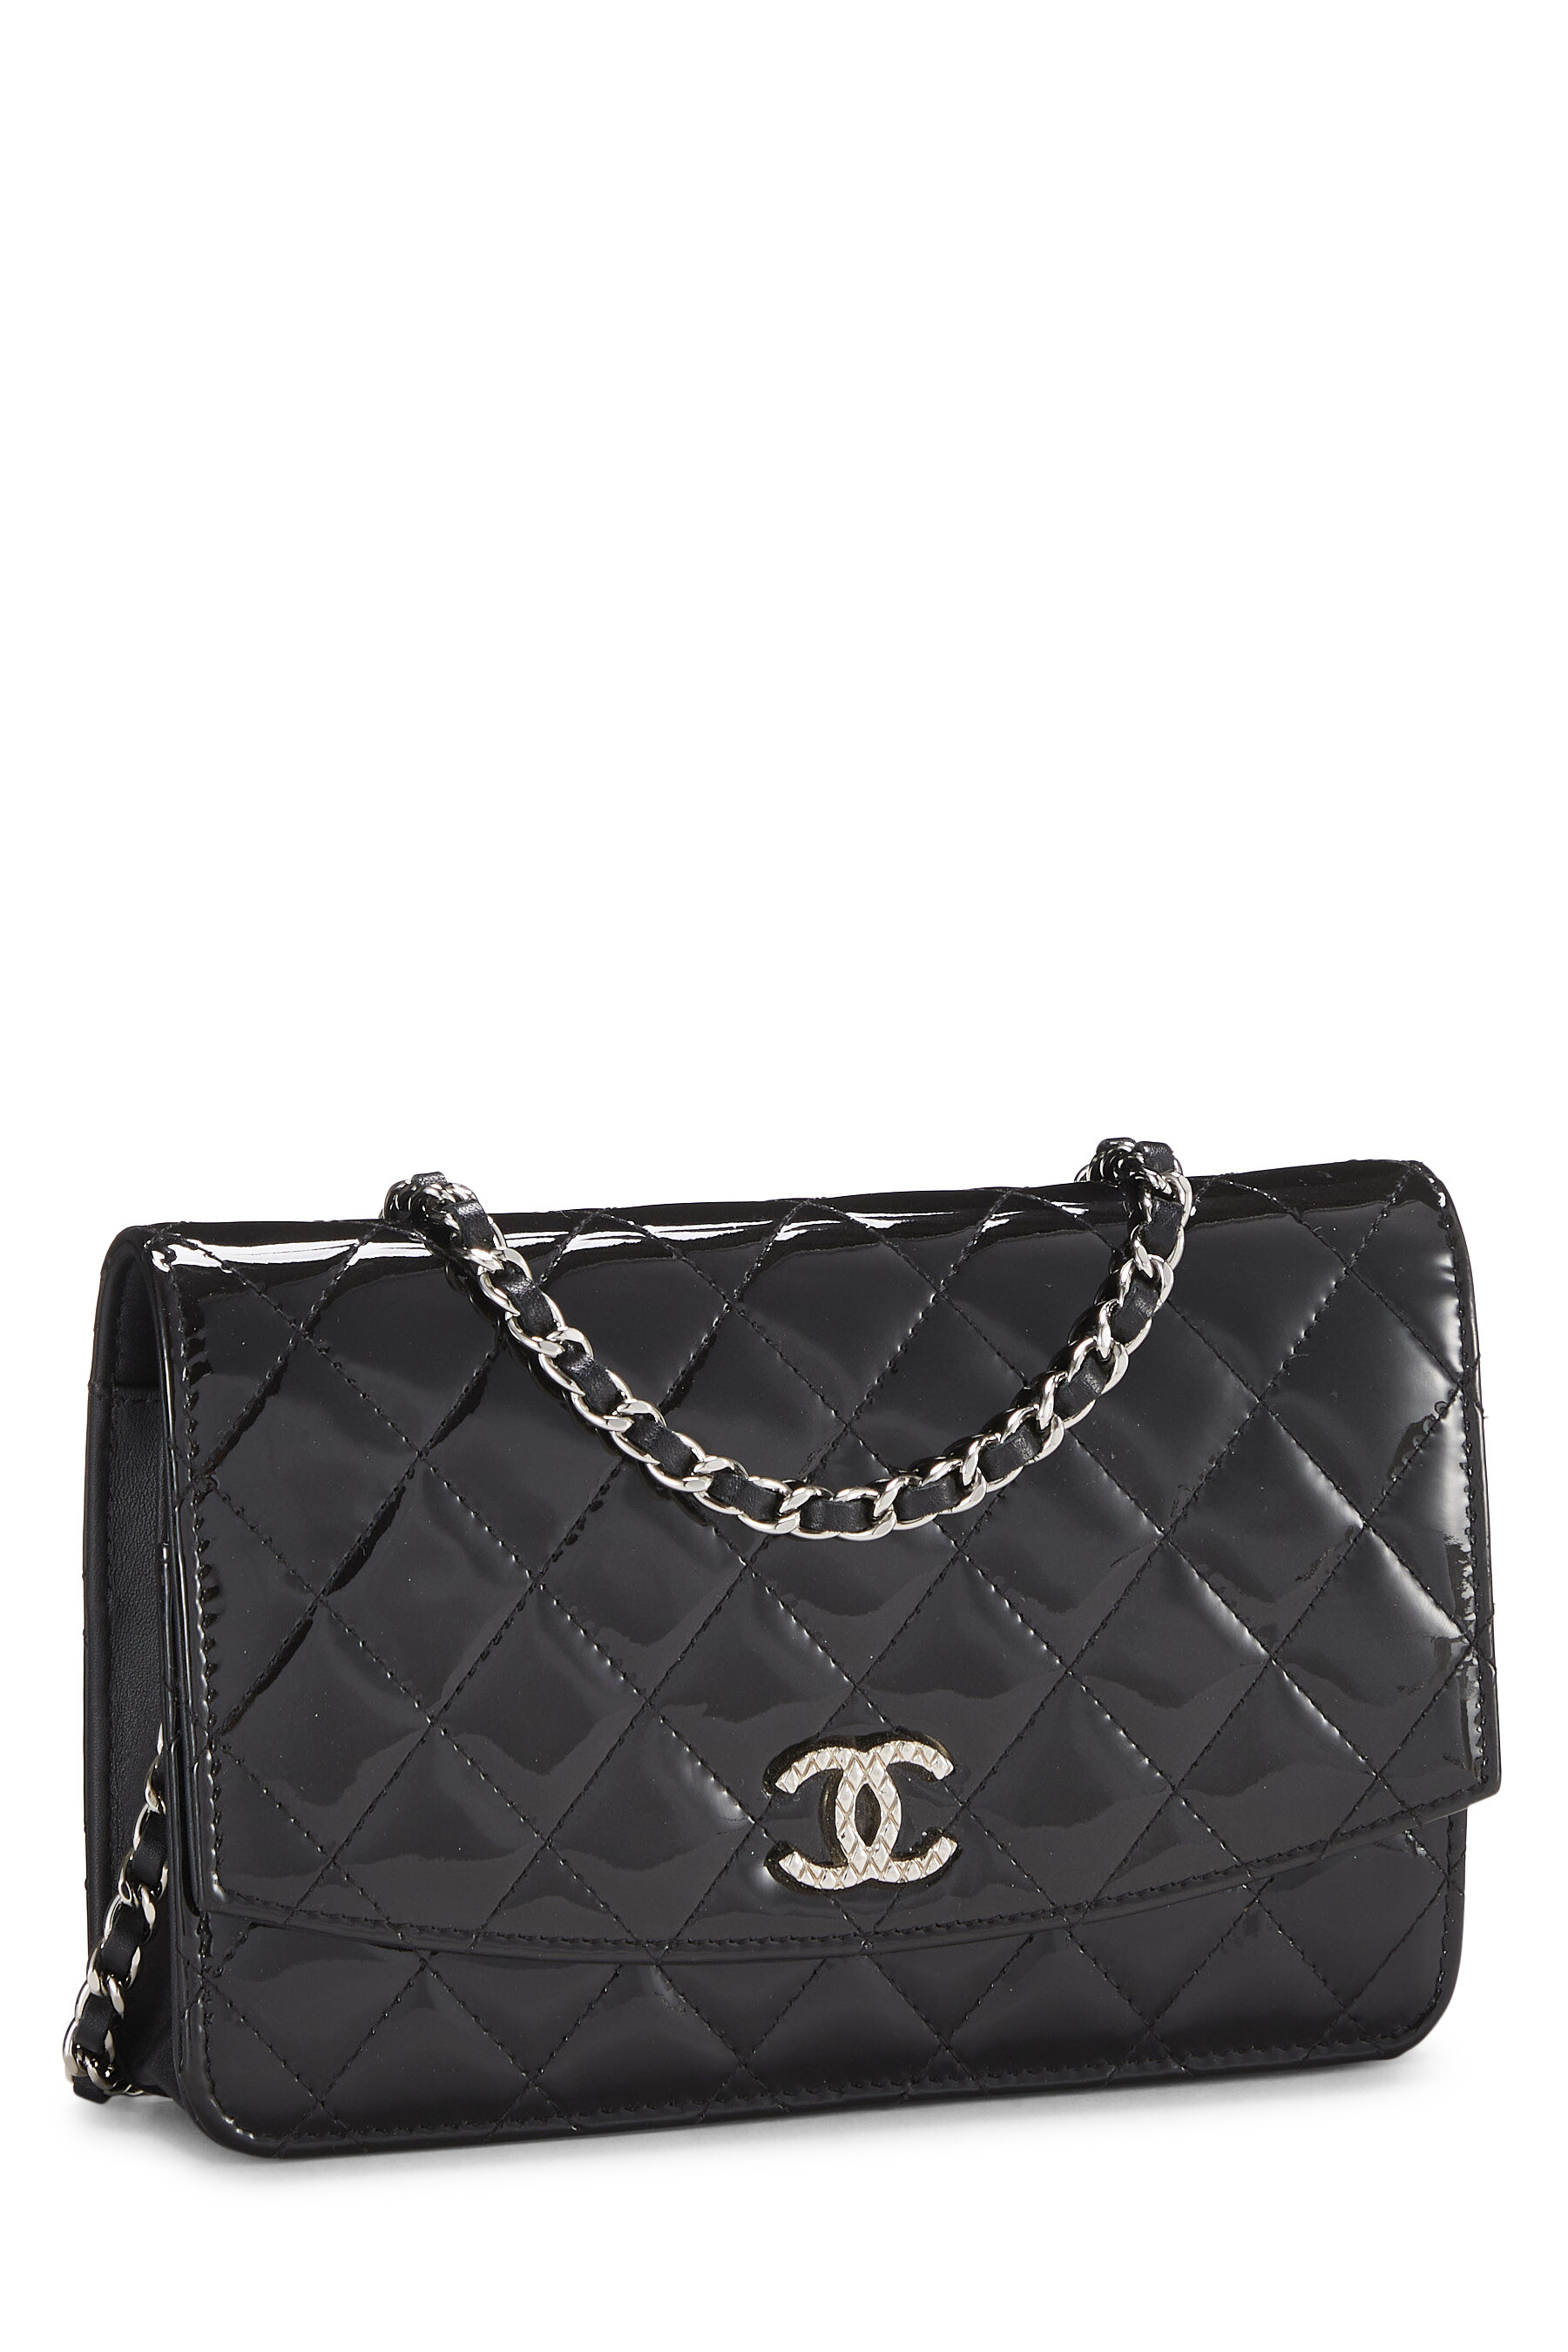 Chanel Black Quilted Patent Leather Wallet on Chain (WOC